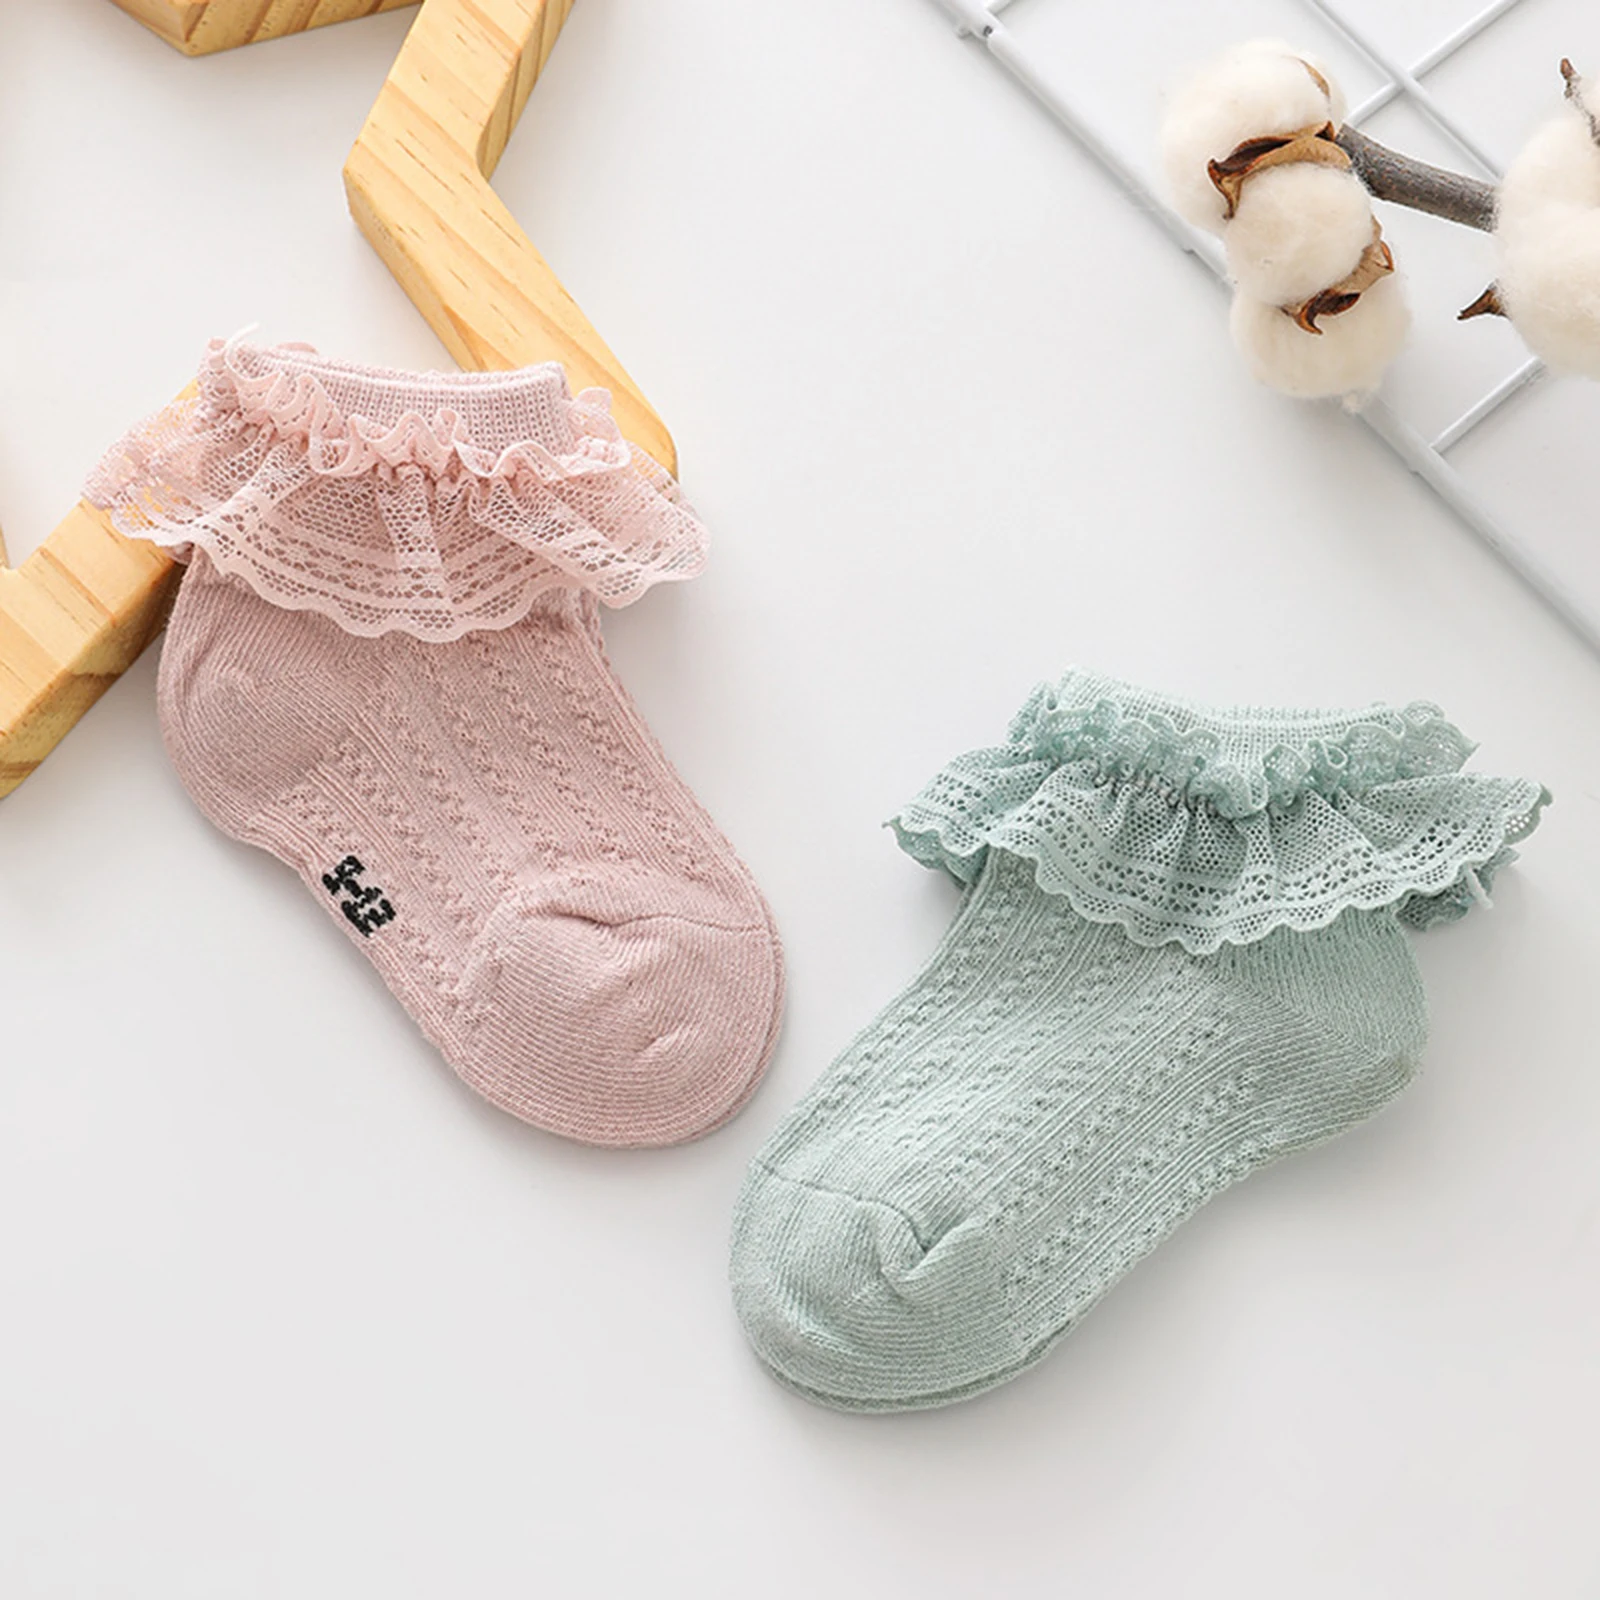 Children Girls Lace Socks Cute Soft Breathable Cotton Baby Ruffle Princess Dress Walking Ankle Short Socks for Toddler Accessory